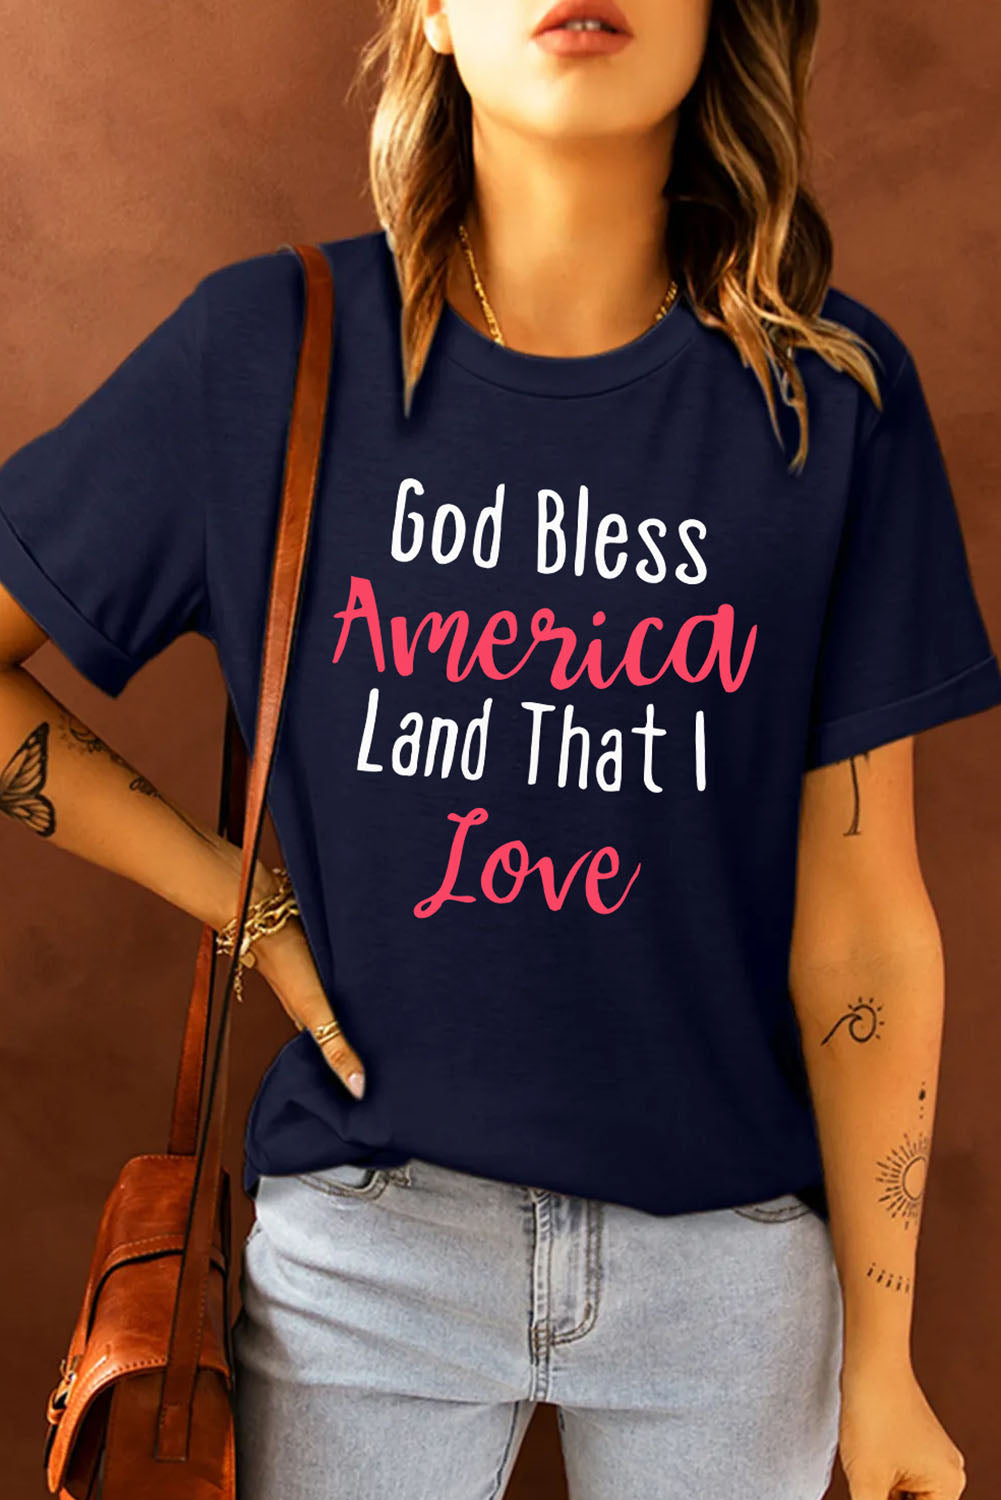 GOD BLESS AMERICA LAND THAT I LOVE Graphic Cuffed Short Sleeve Tee Shirt